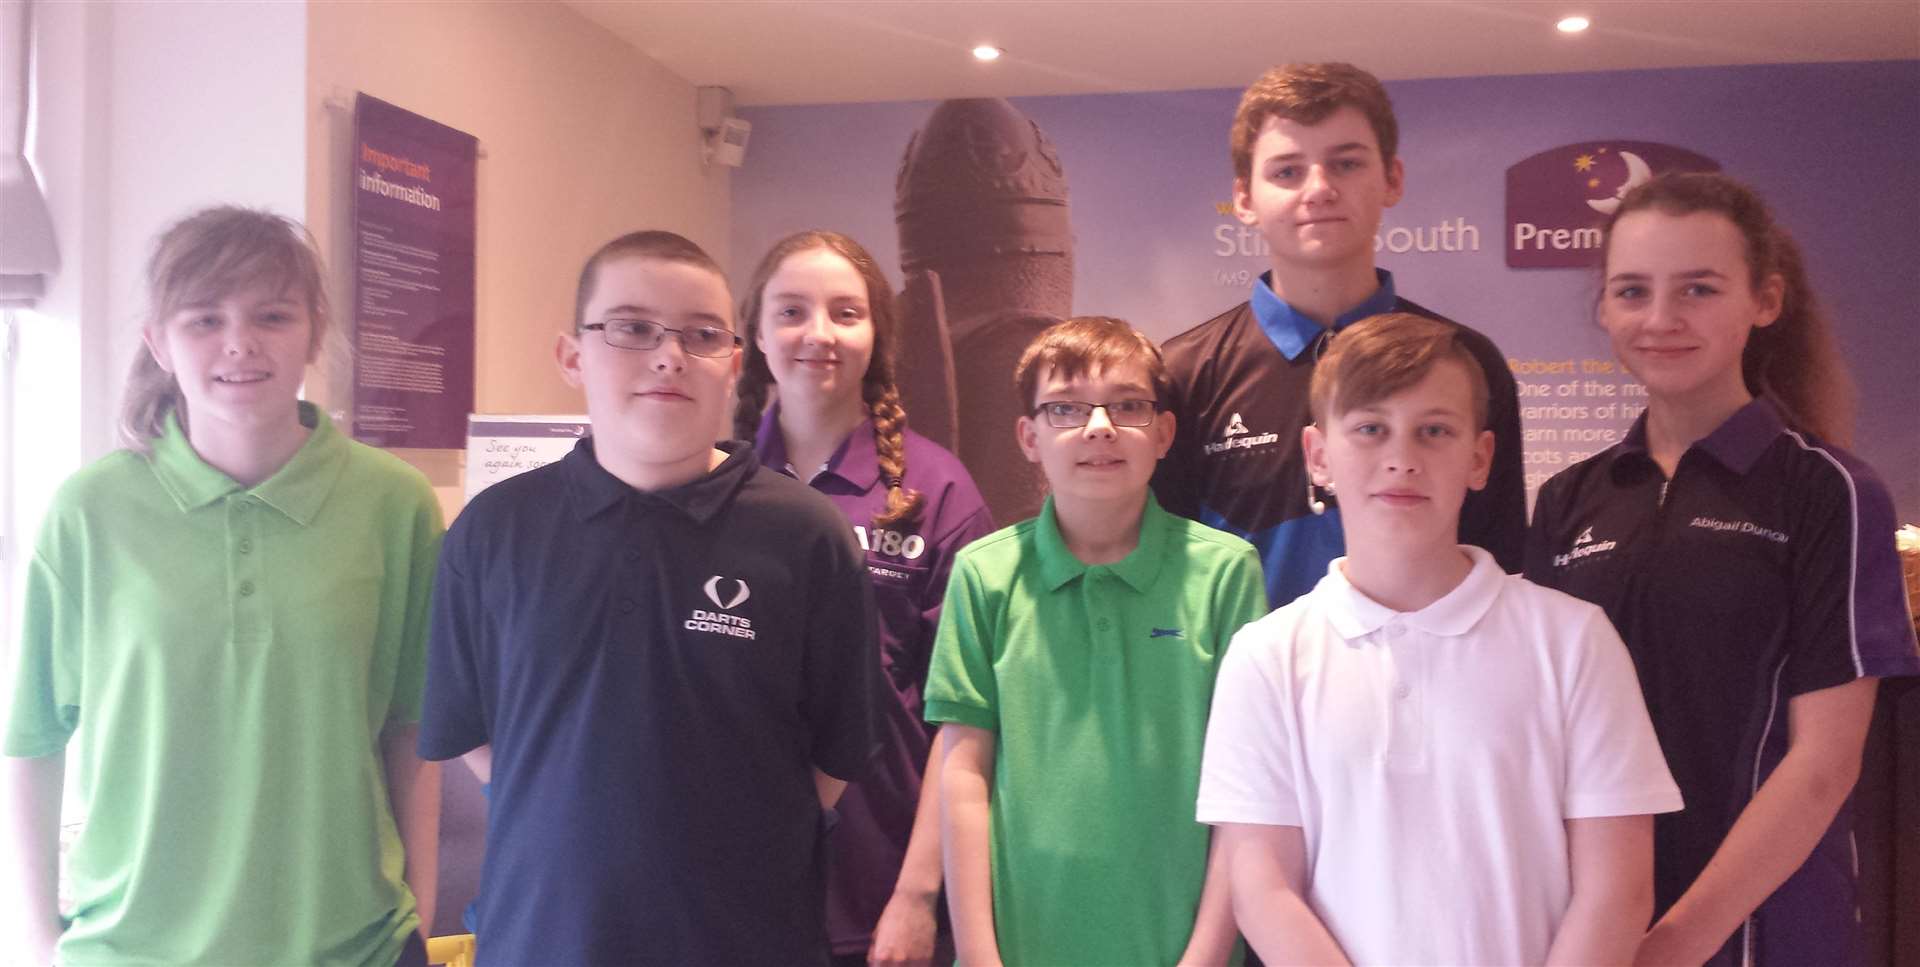 Caithness Youth Darts members including Girls’ under-18 winner Abigail Duncan (extreme right) is seen with fellow Caithness Youth Darts members who competed at the Central Open. They are, from left, Kara Sutherland, Ryan Campbell, Sammie Campbell, Marc Durrand, Jack Duncan and Tyler Hutton.